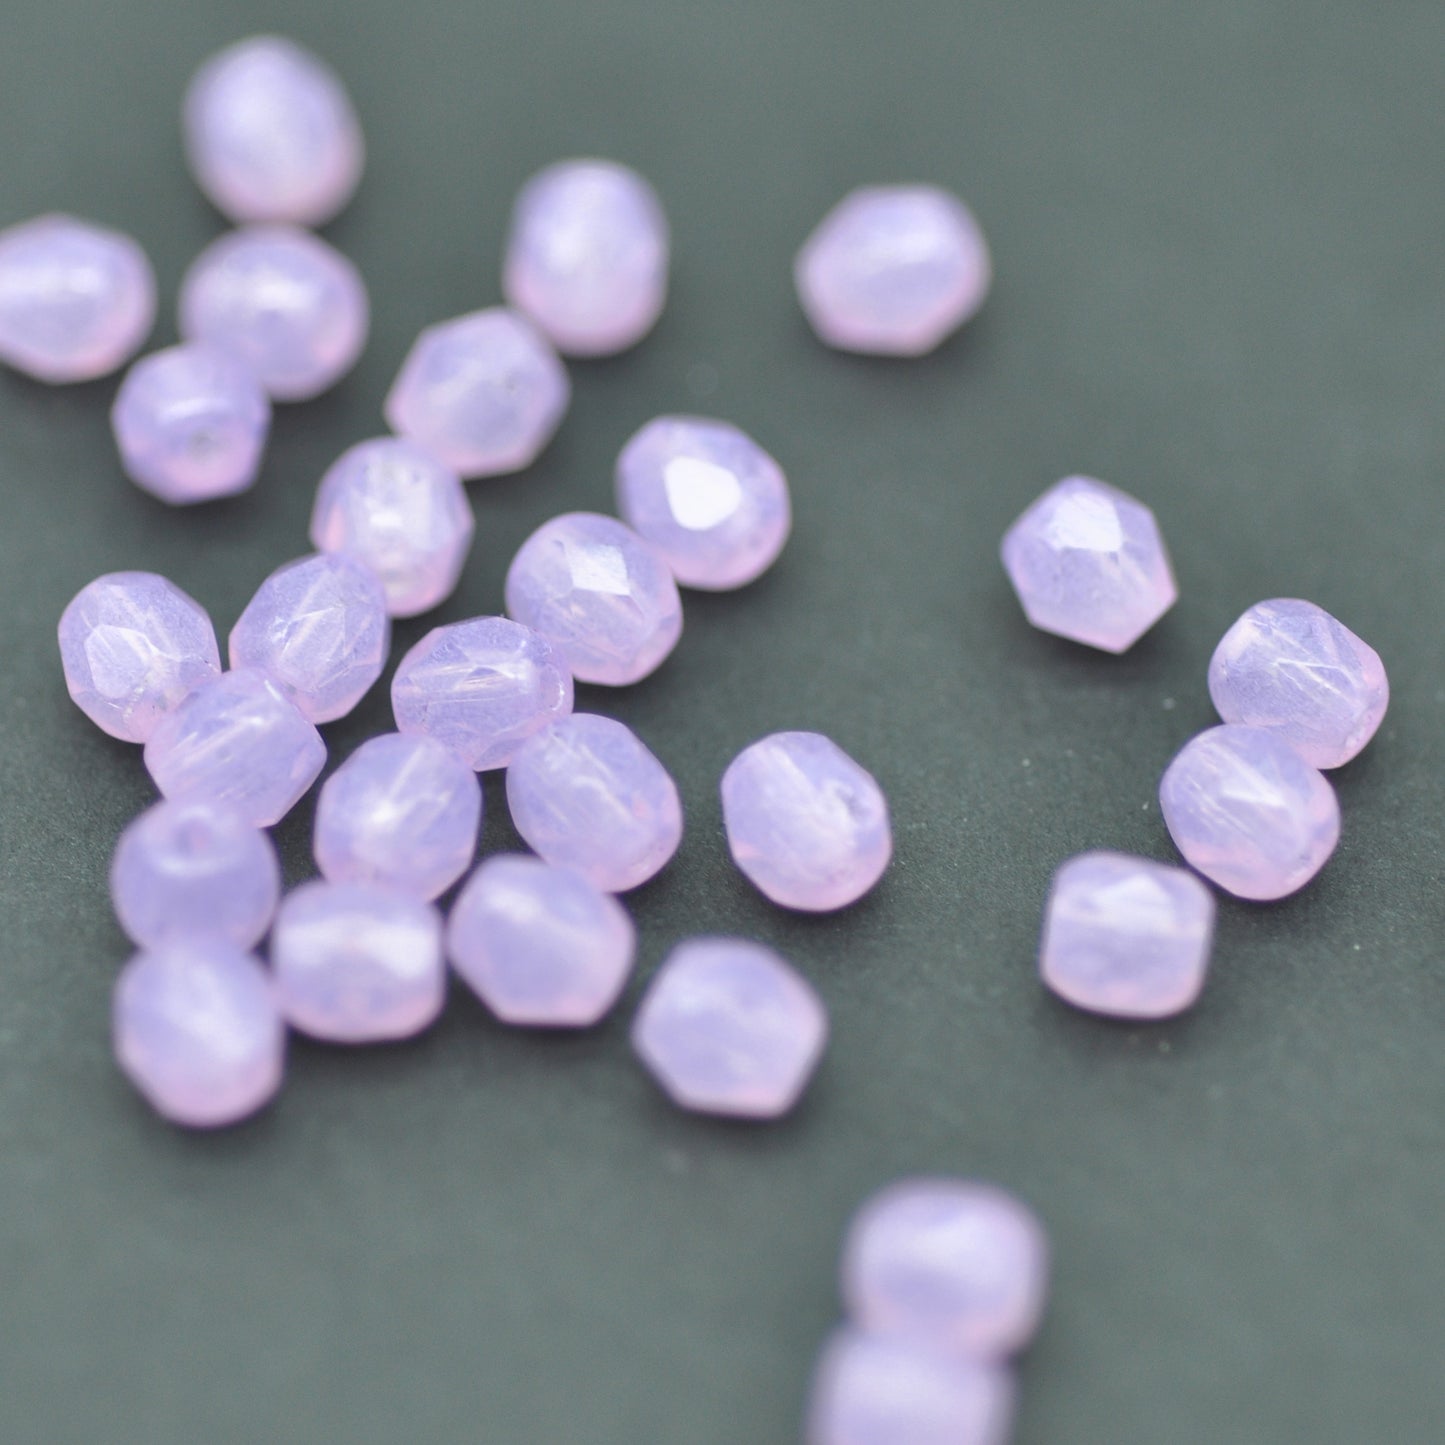 Preciosa faceted glass beads / violet opal / 100 pcs. / 4mm